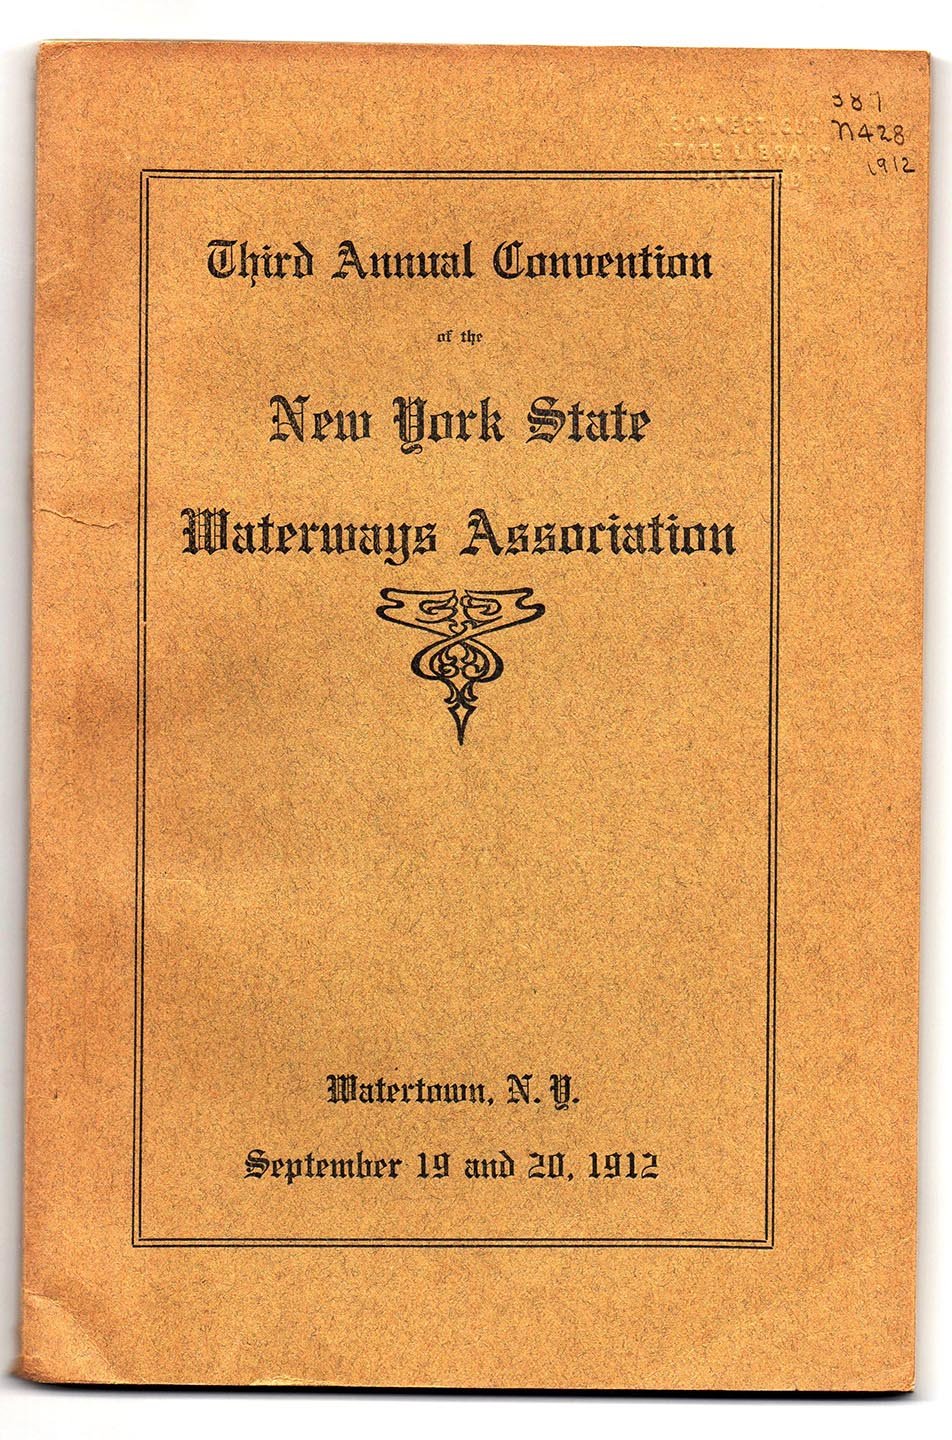 Third Annual Convention of the New York State Waterways Association, Watertown, N.Y. September 19 and 20, 1912